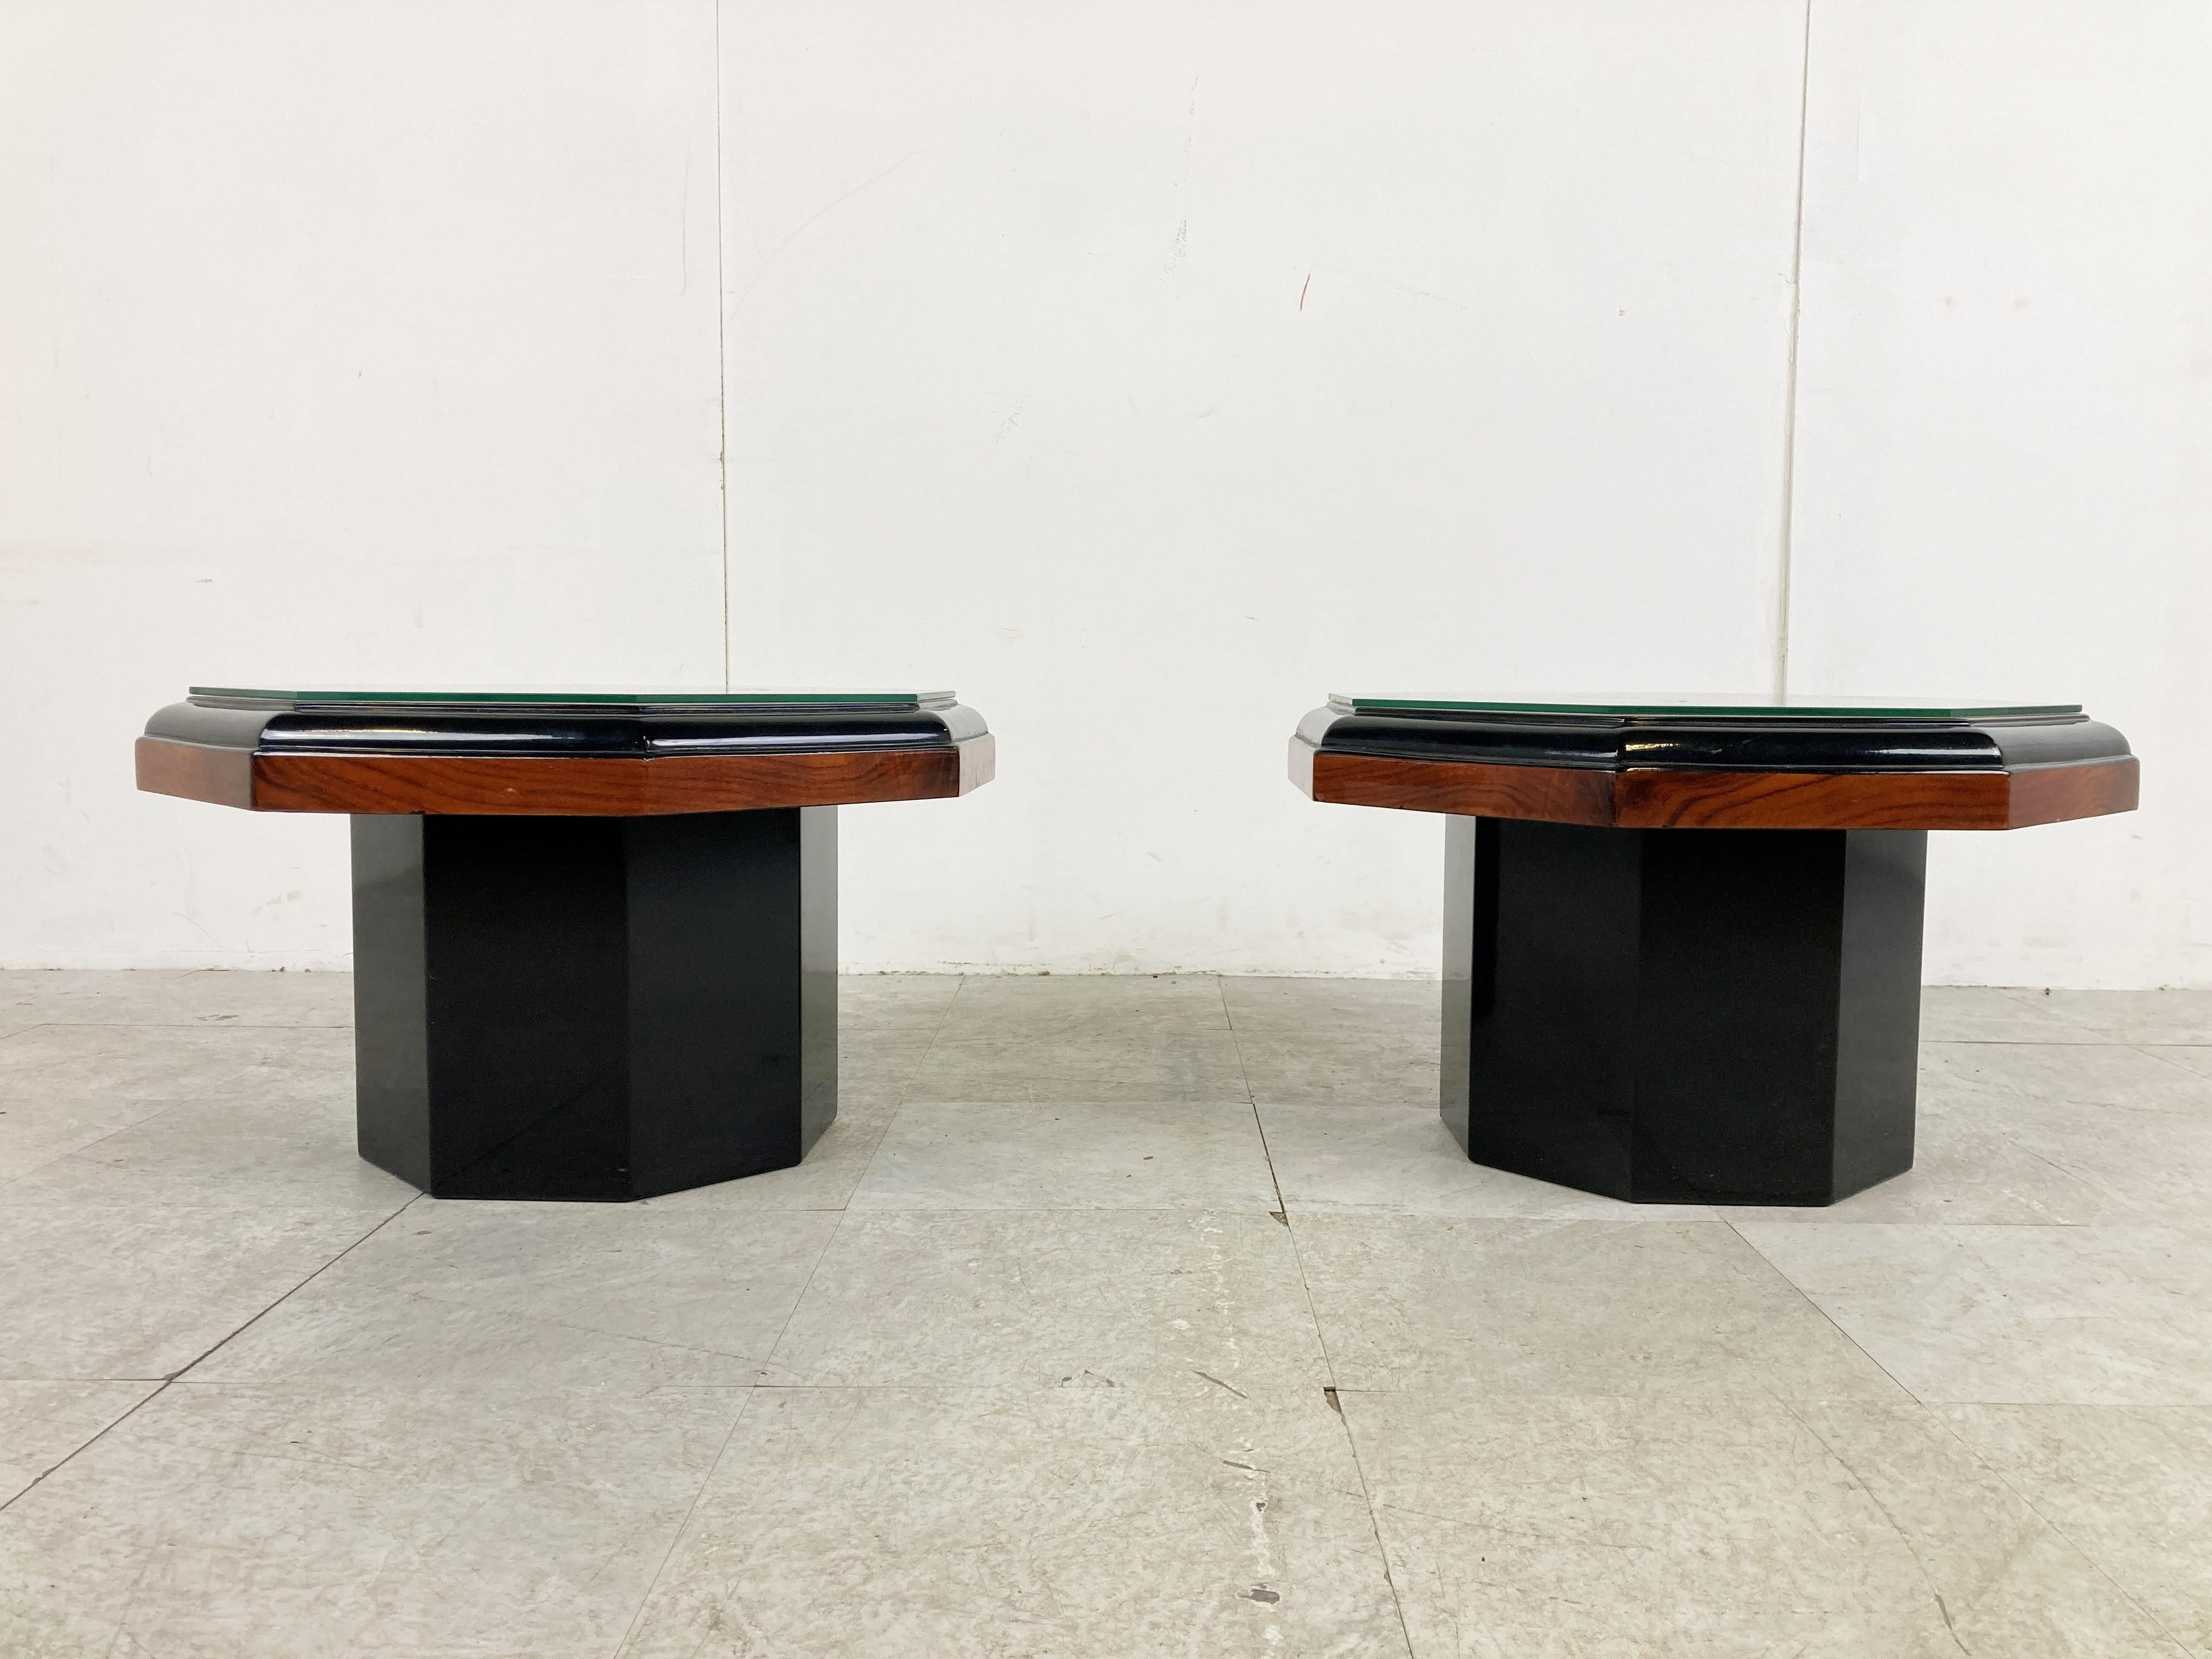 Vintage Burl Wooden Coffee Tables, 1980s For Sale 2